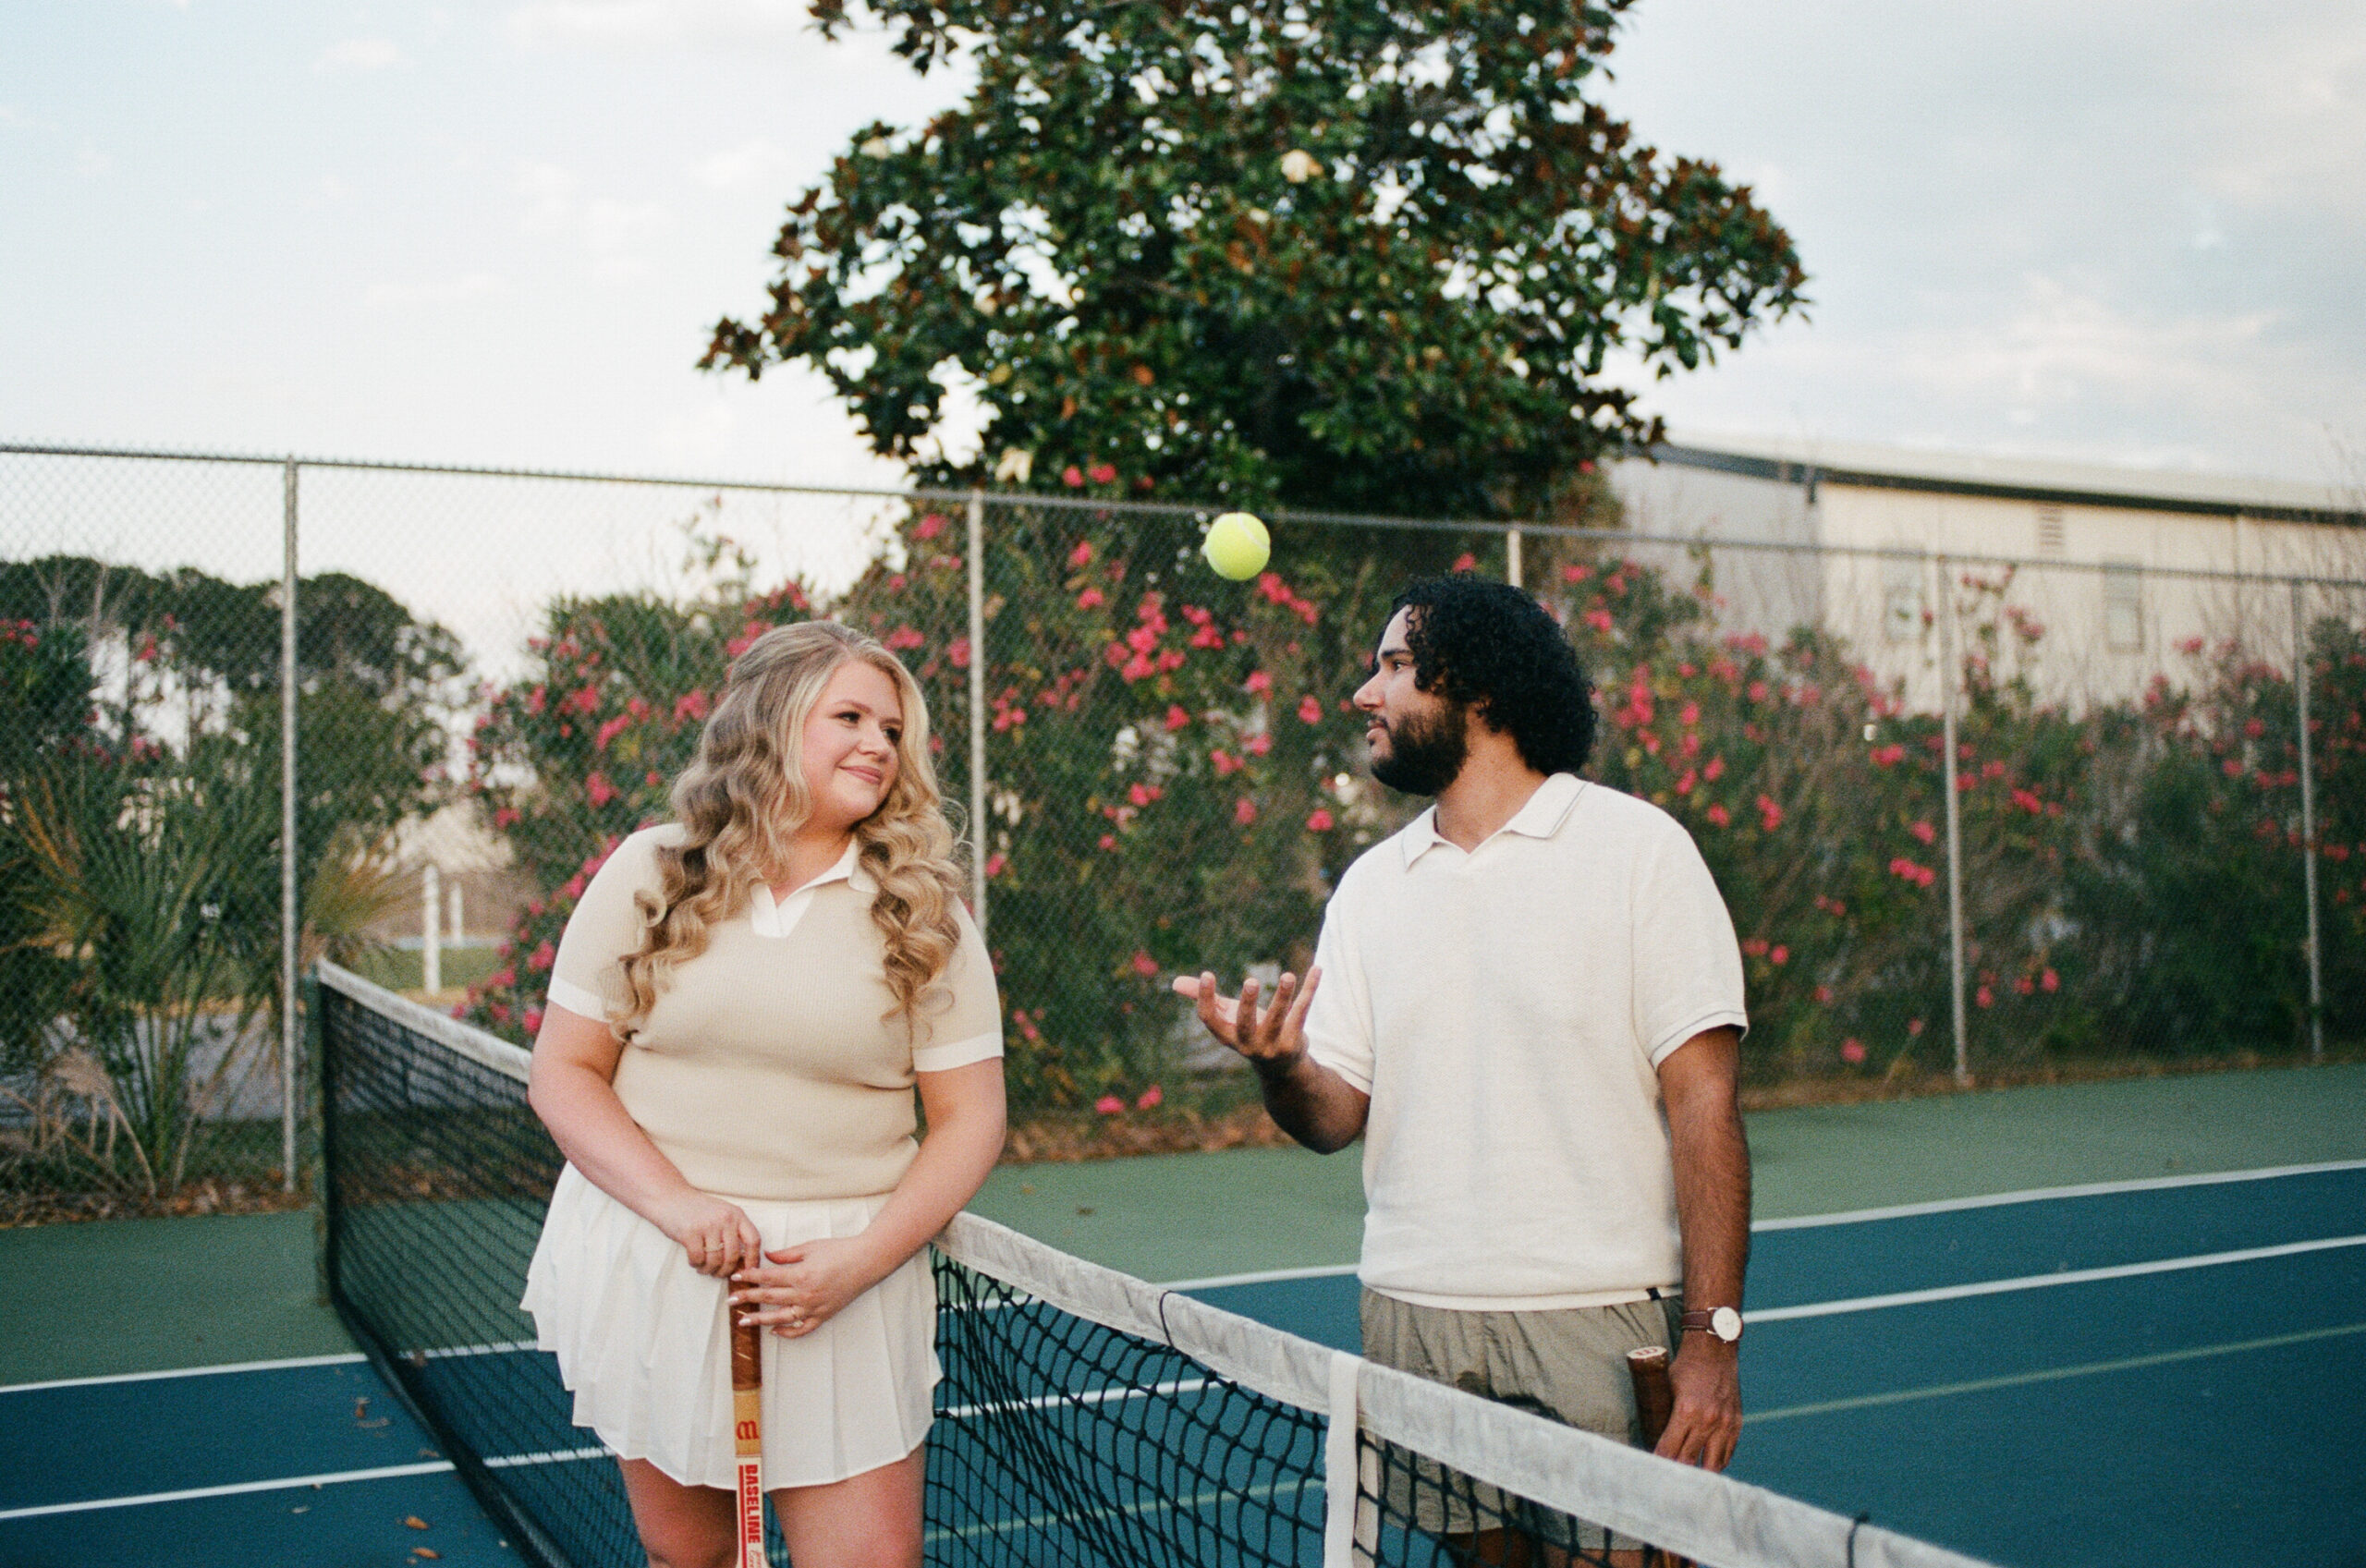 A man tossing up a tennis ball as he looks at his partner and she looks at him during their Florida couple photoshoot